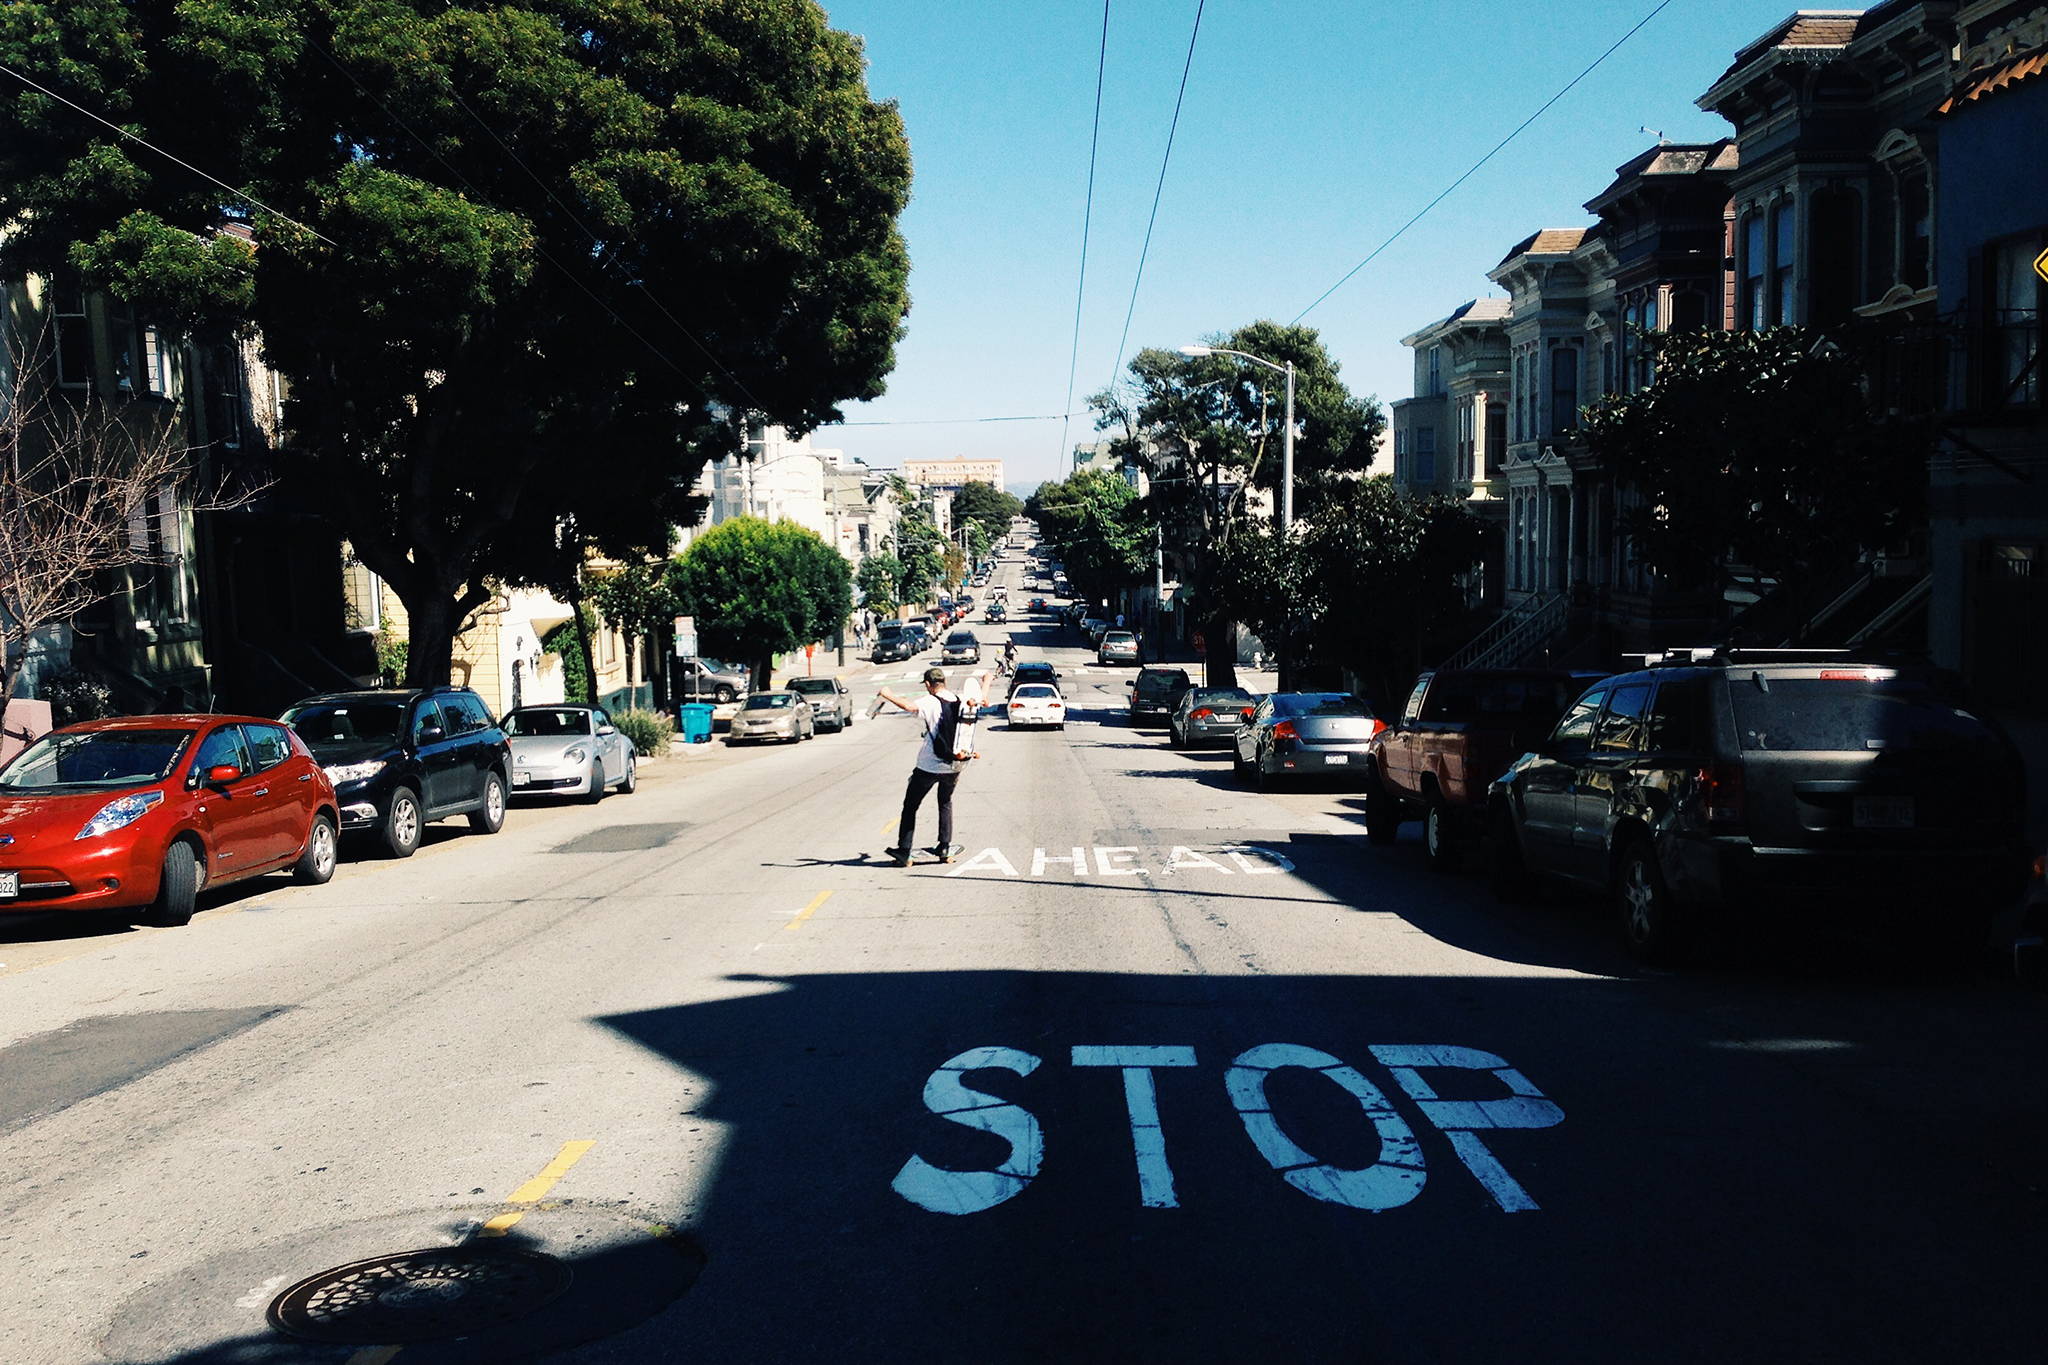 Man skateboarding in the middle of a San Francisco street